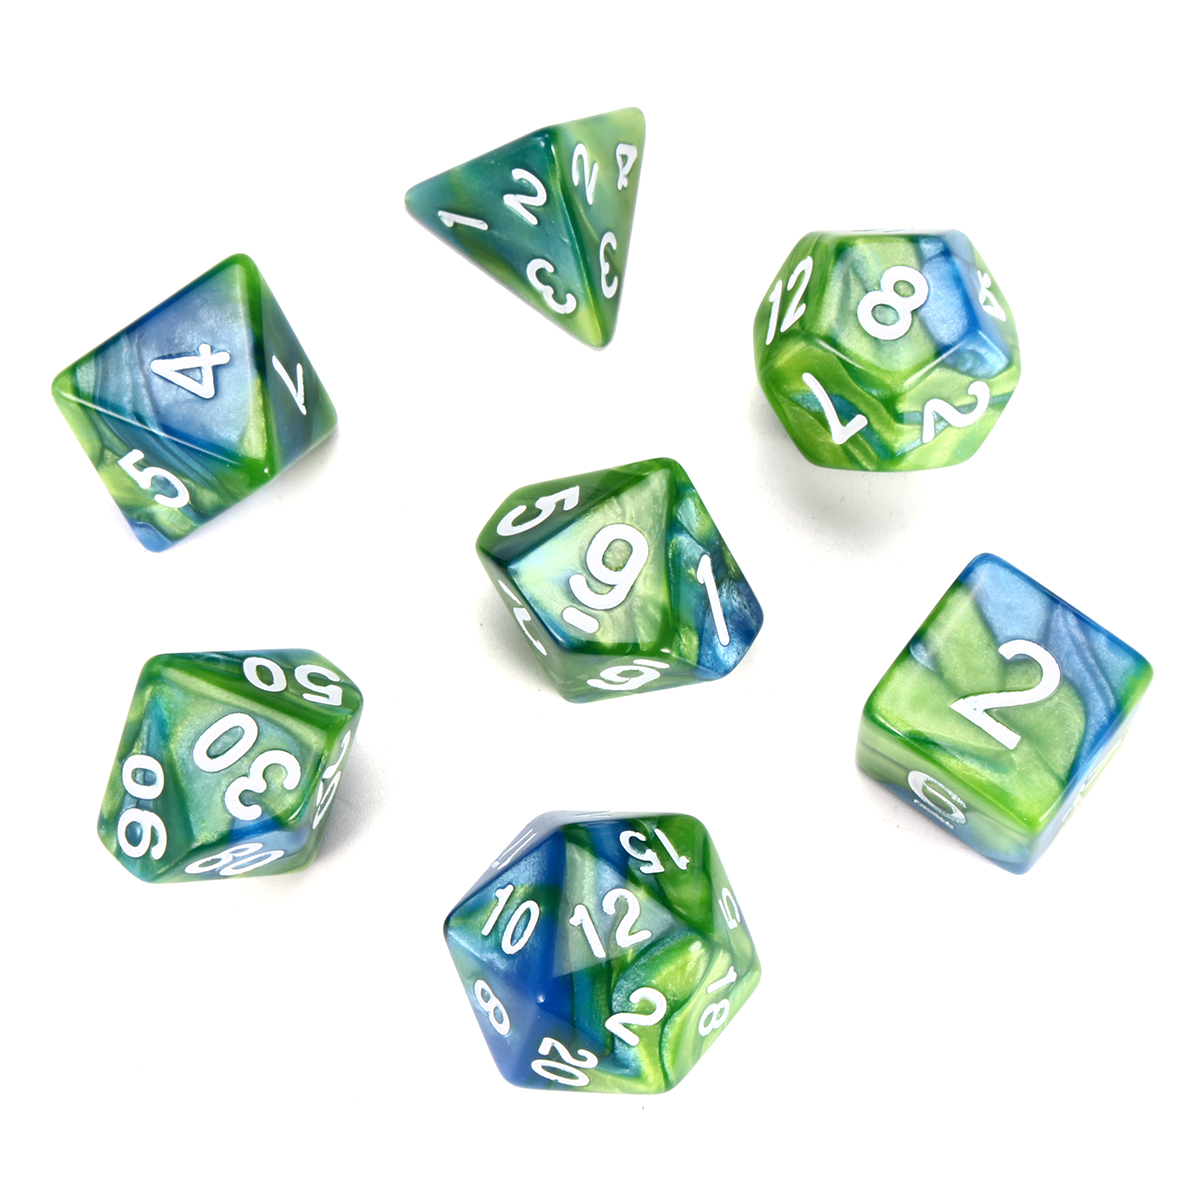 7Pcs//Set Role Playing Polyhedral Metal Dice For DND RPG MTG Tabletop Game Toys